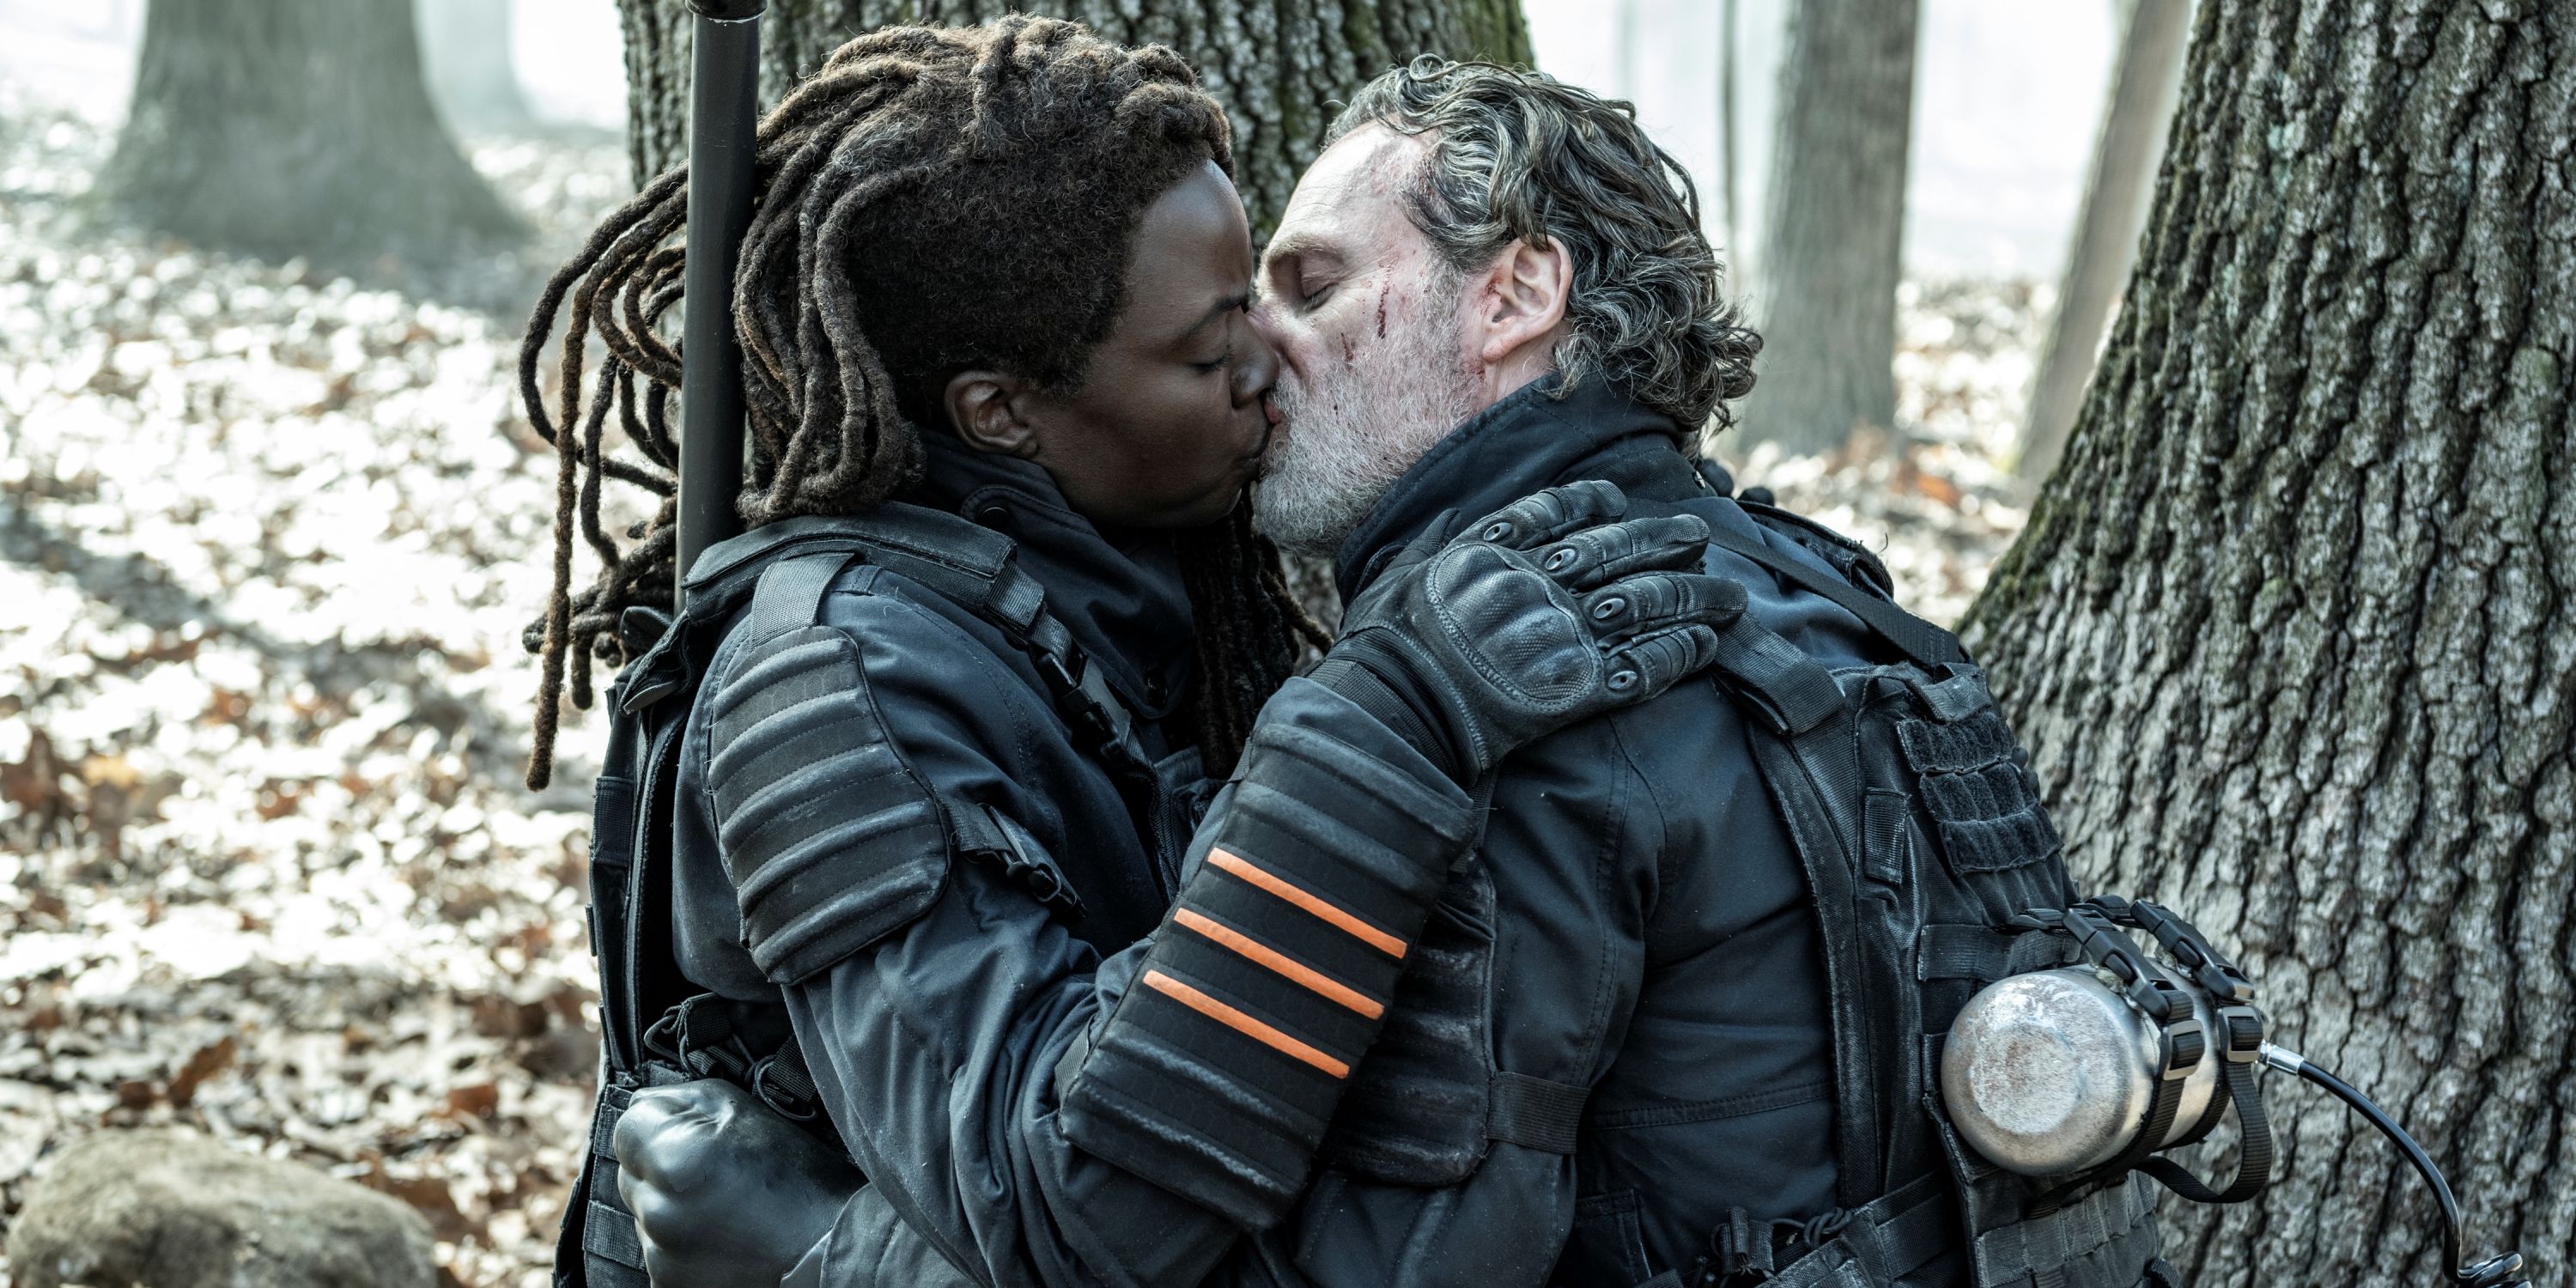 Andrew Lincoln as Rick Grimes and Danai Gurira as Michonne kissing in the forest 